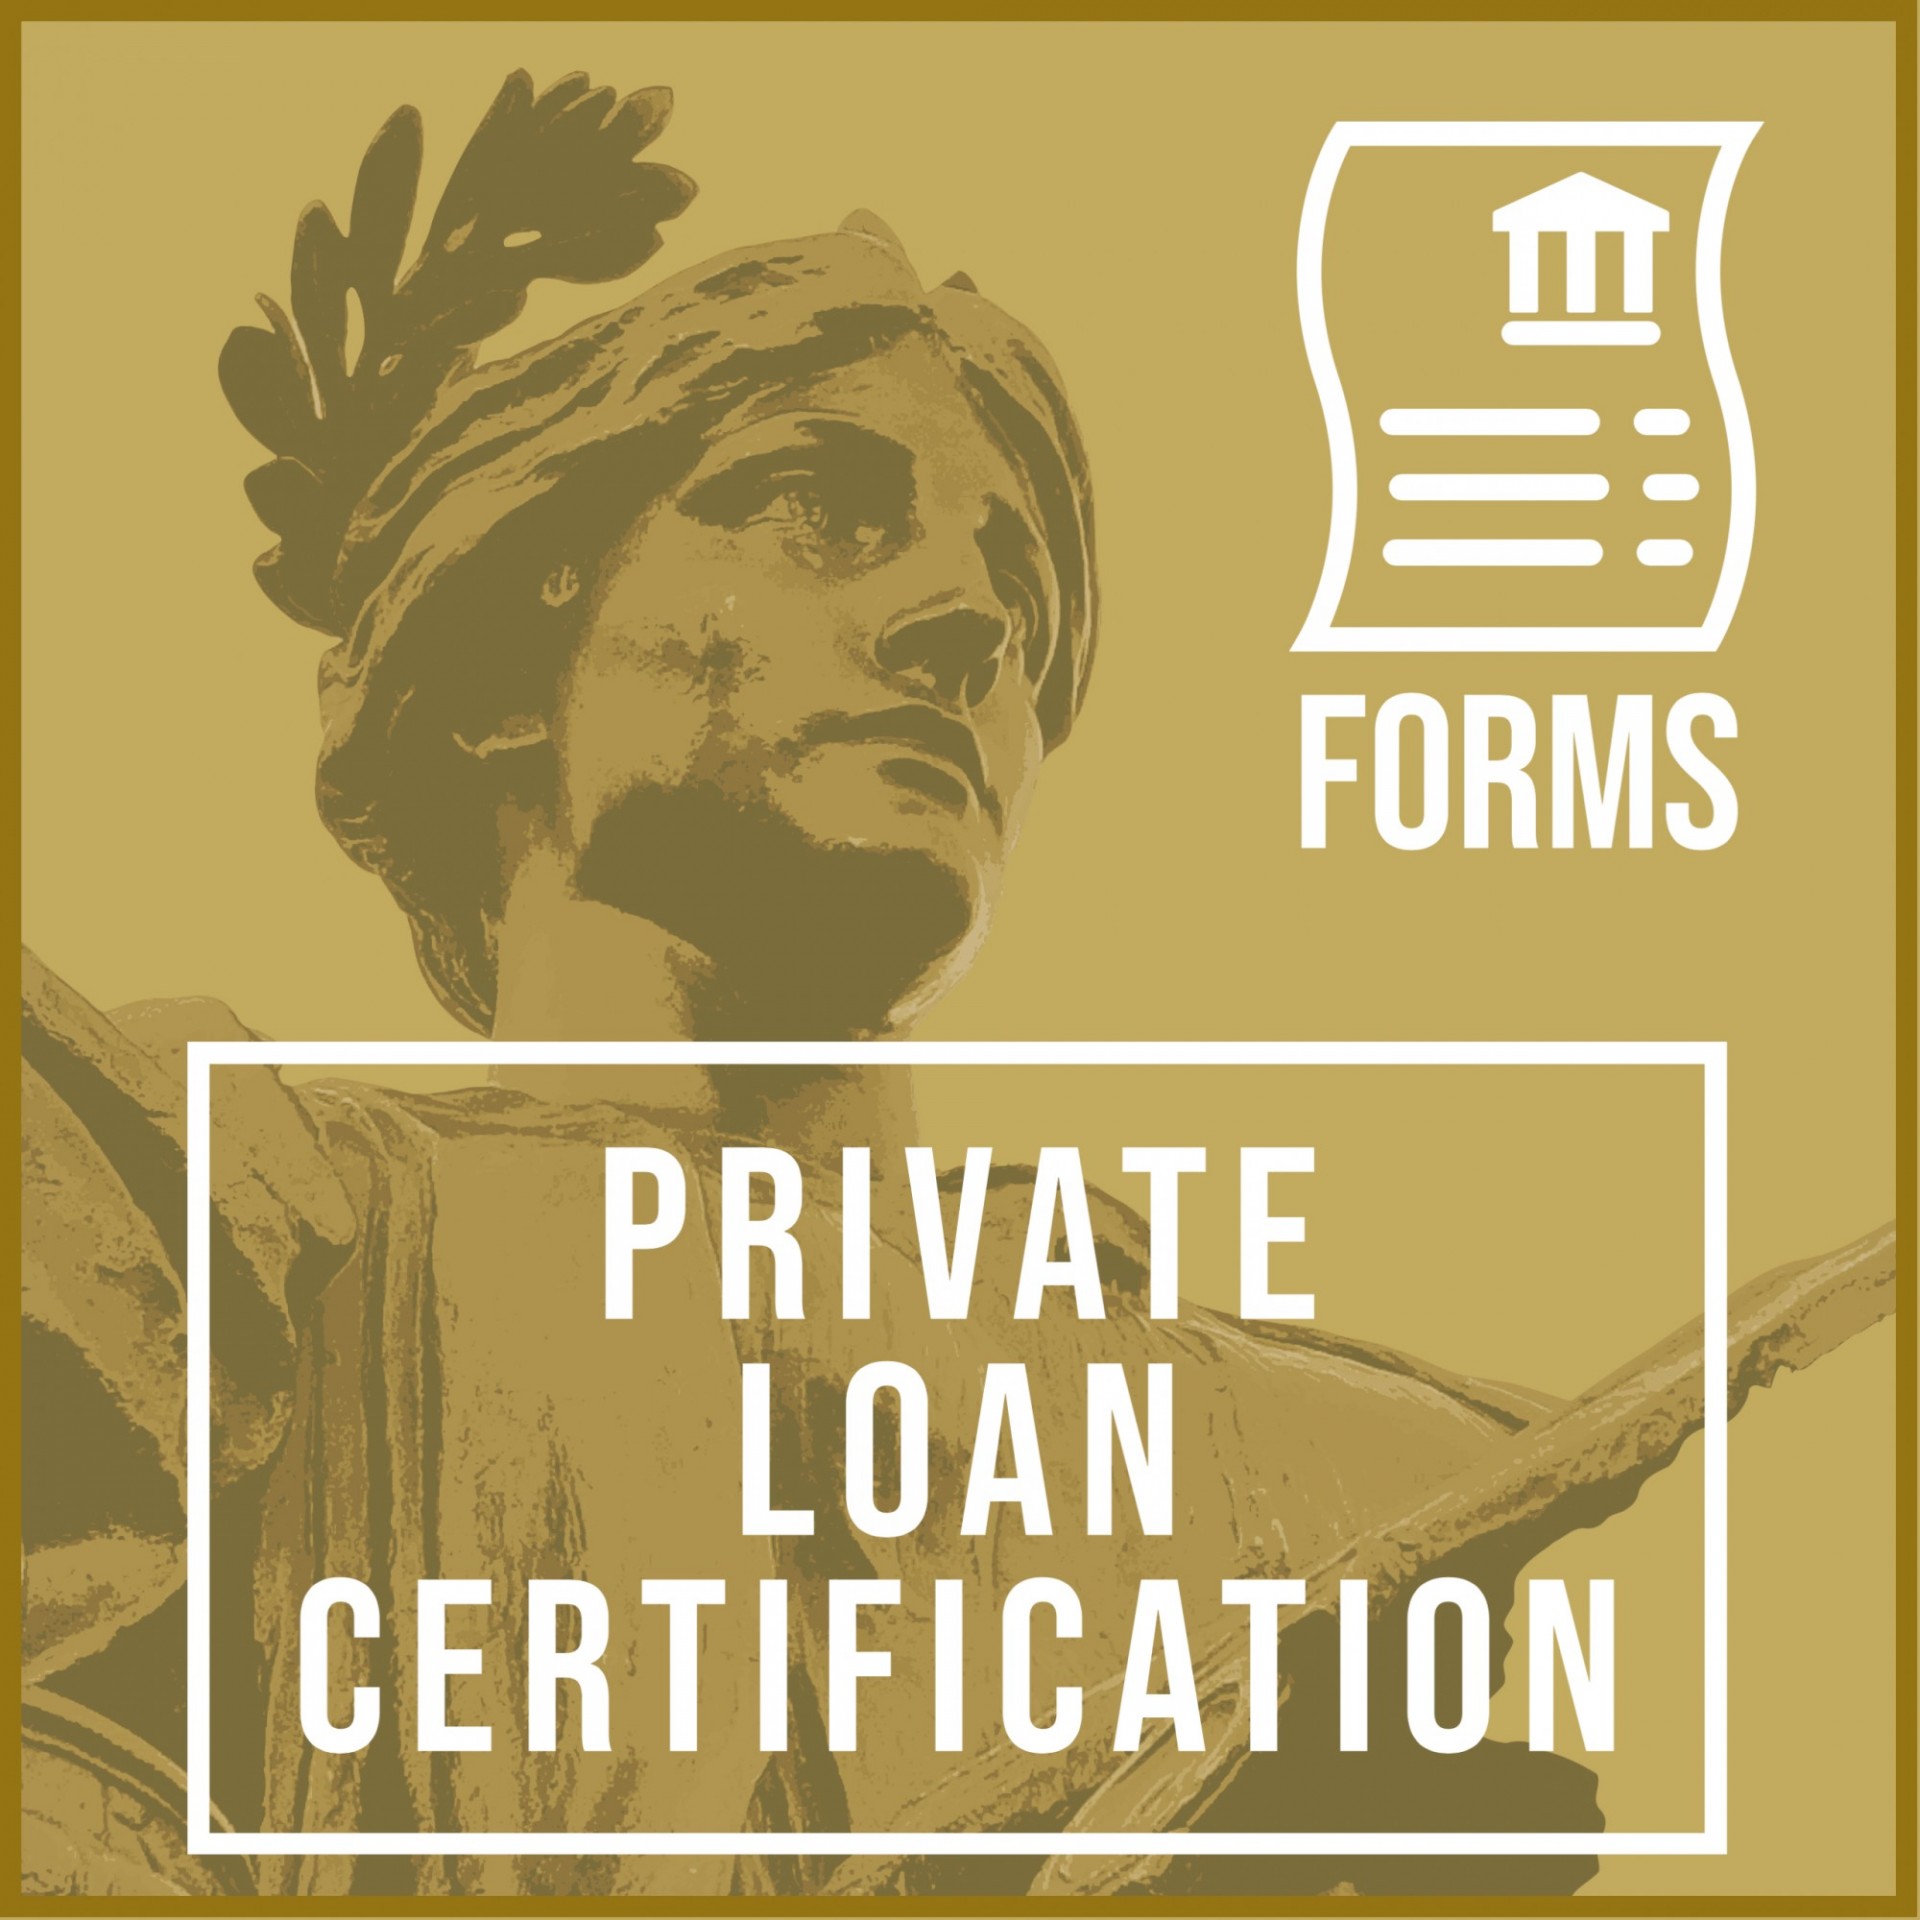 Forms Icon: Private Education Loan Self-Certification